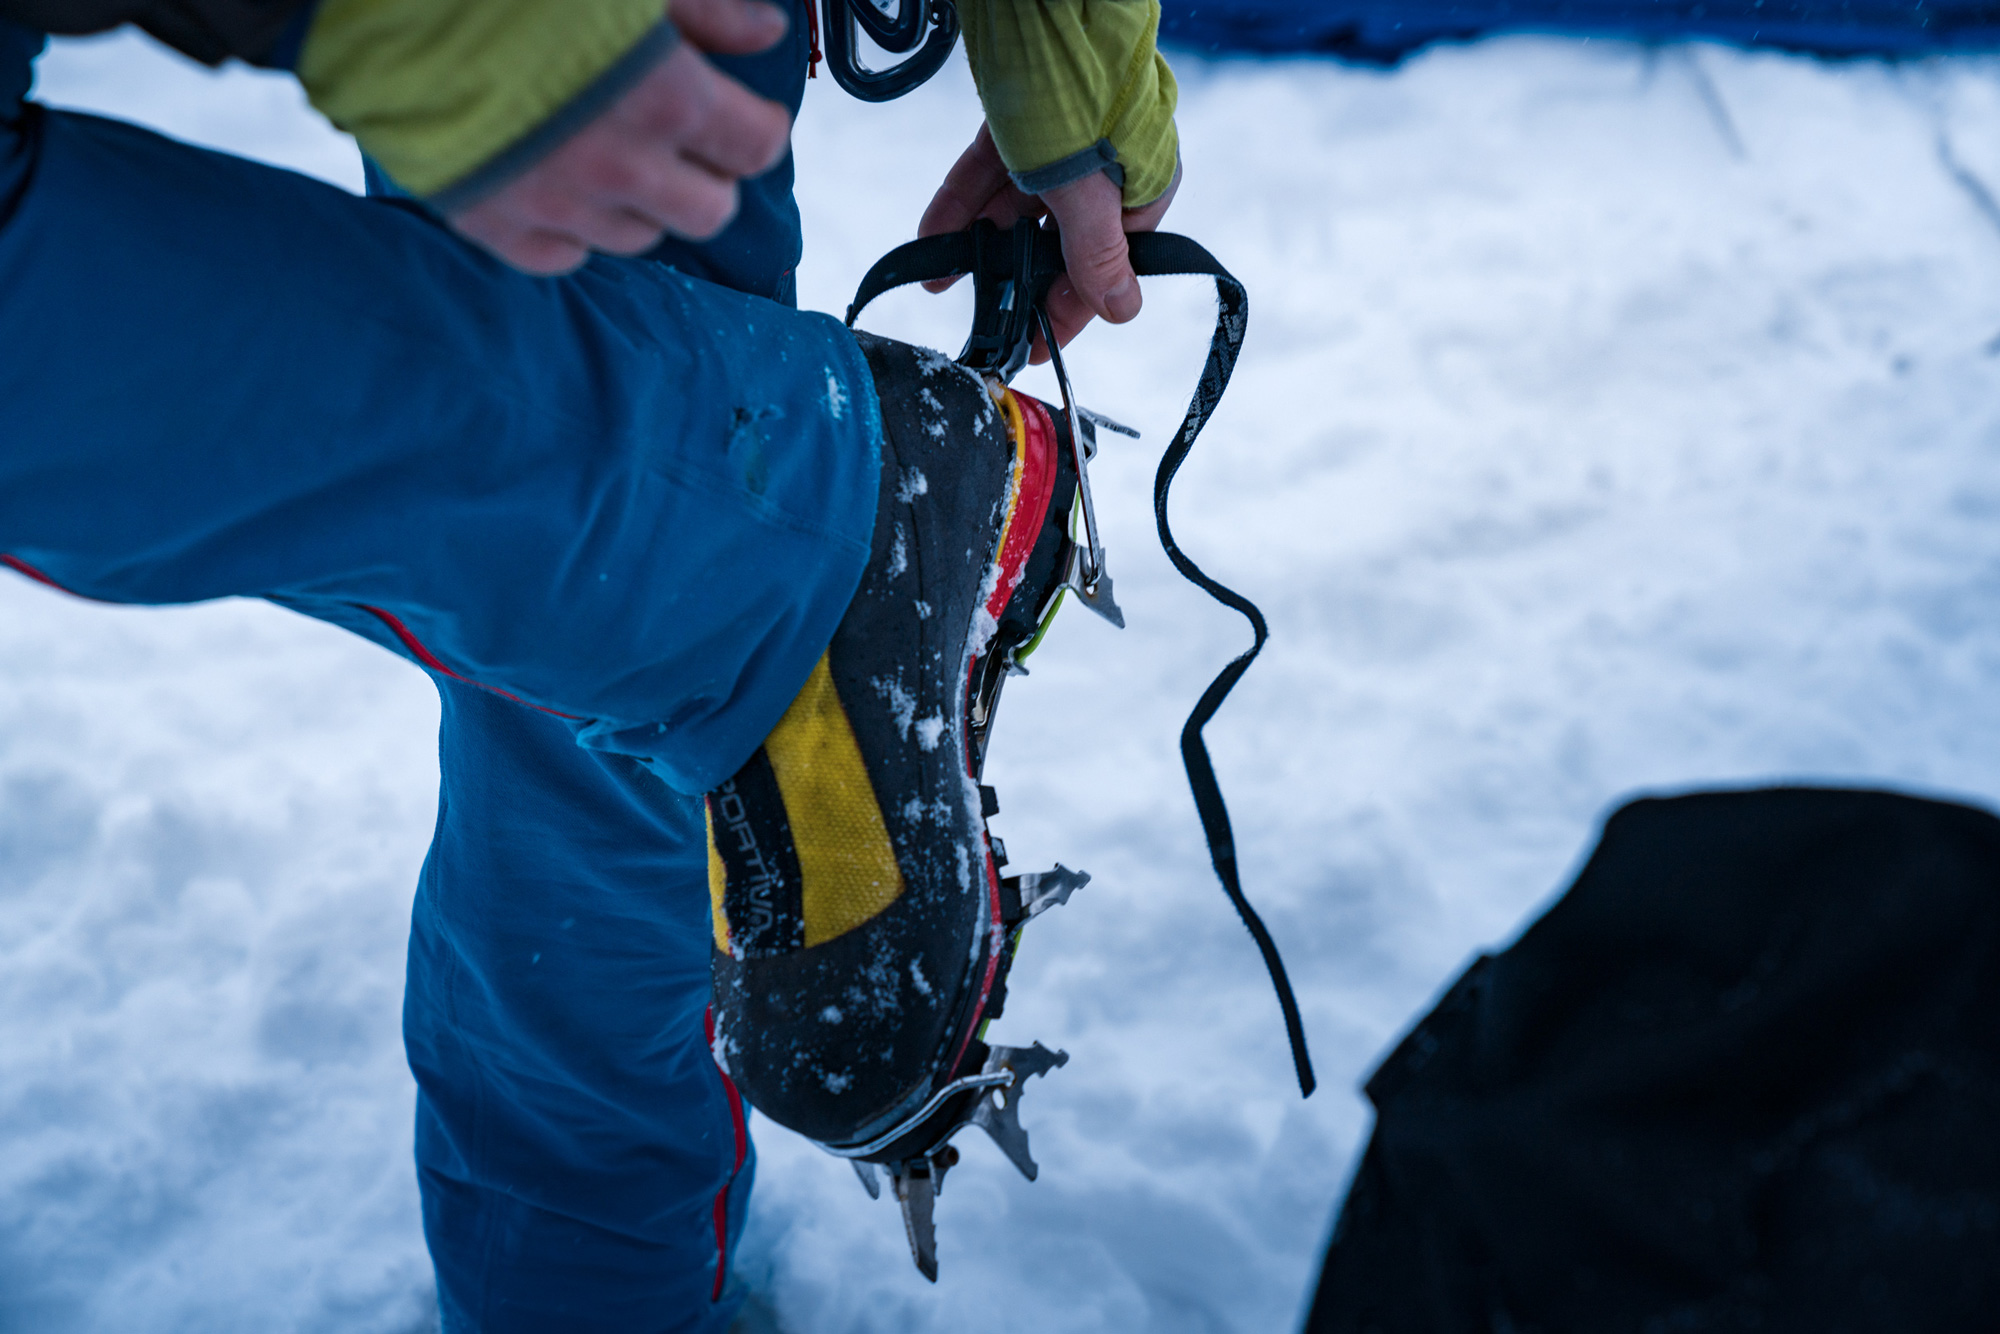 Climbing boots with spikes on to conquer ice